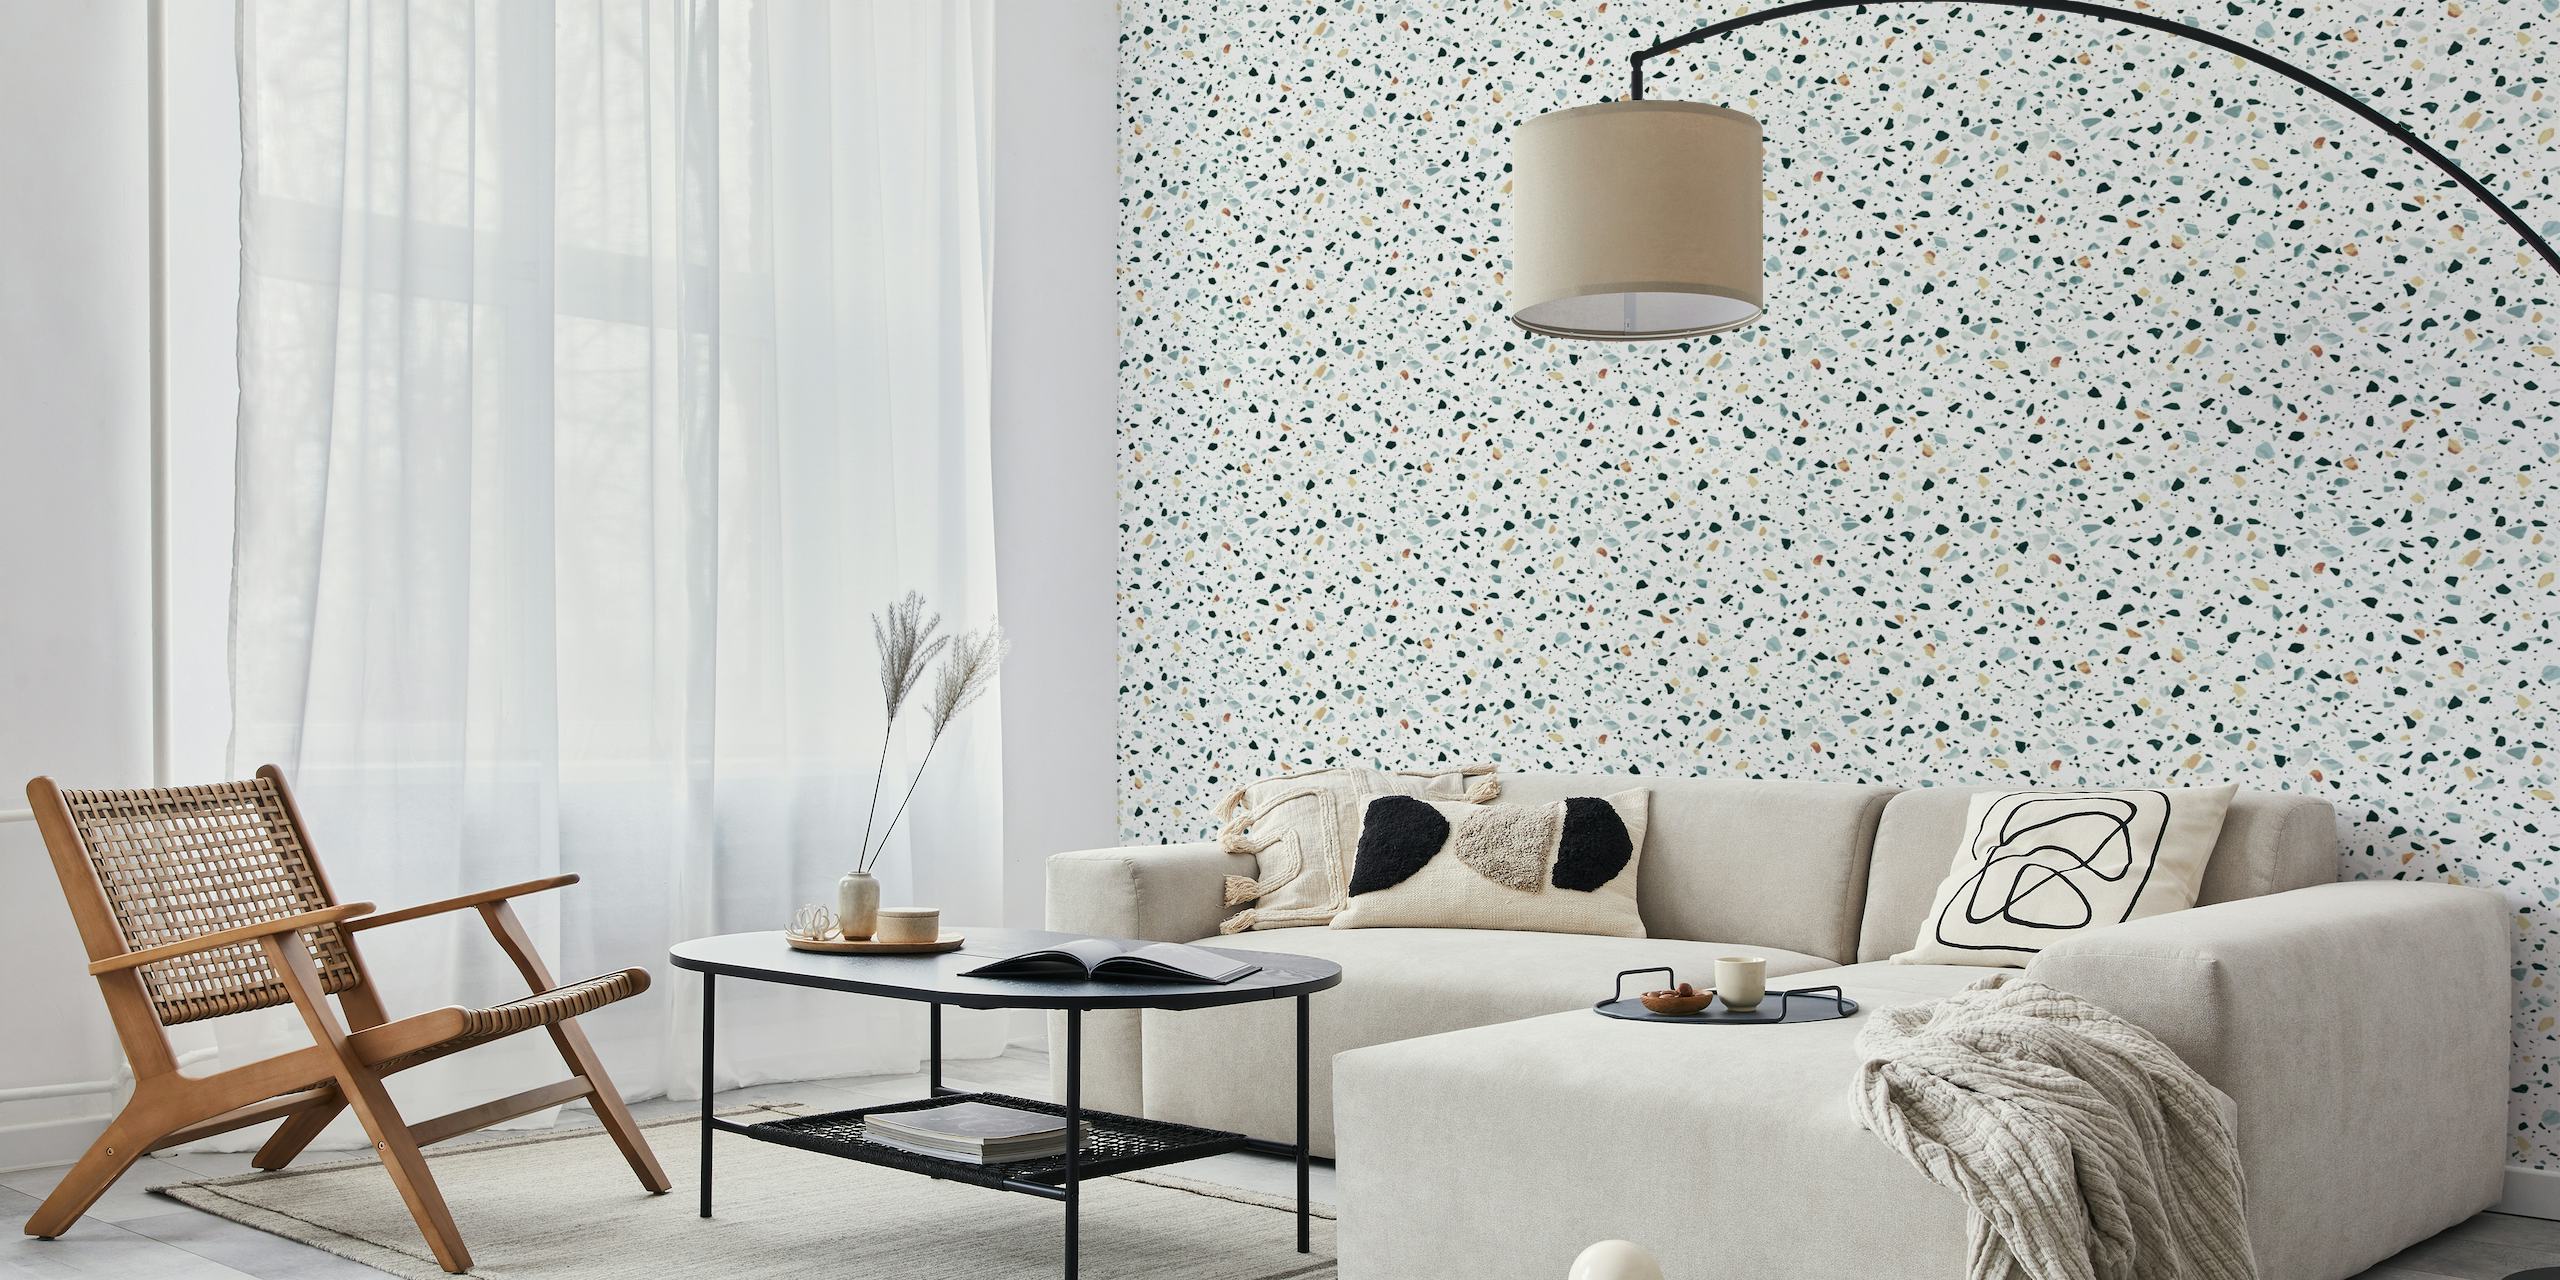 Italian Terrazzo style wallpaper with a colorful speckled design